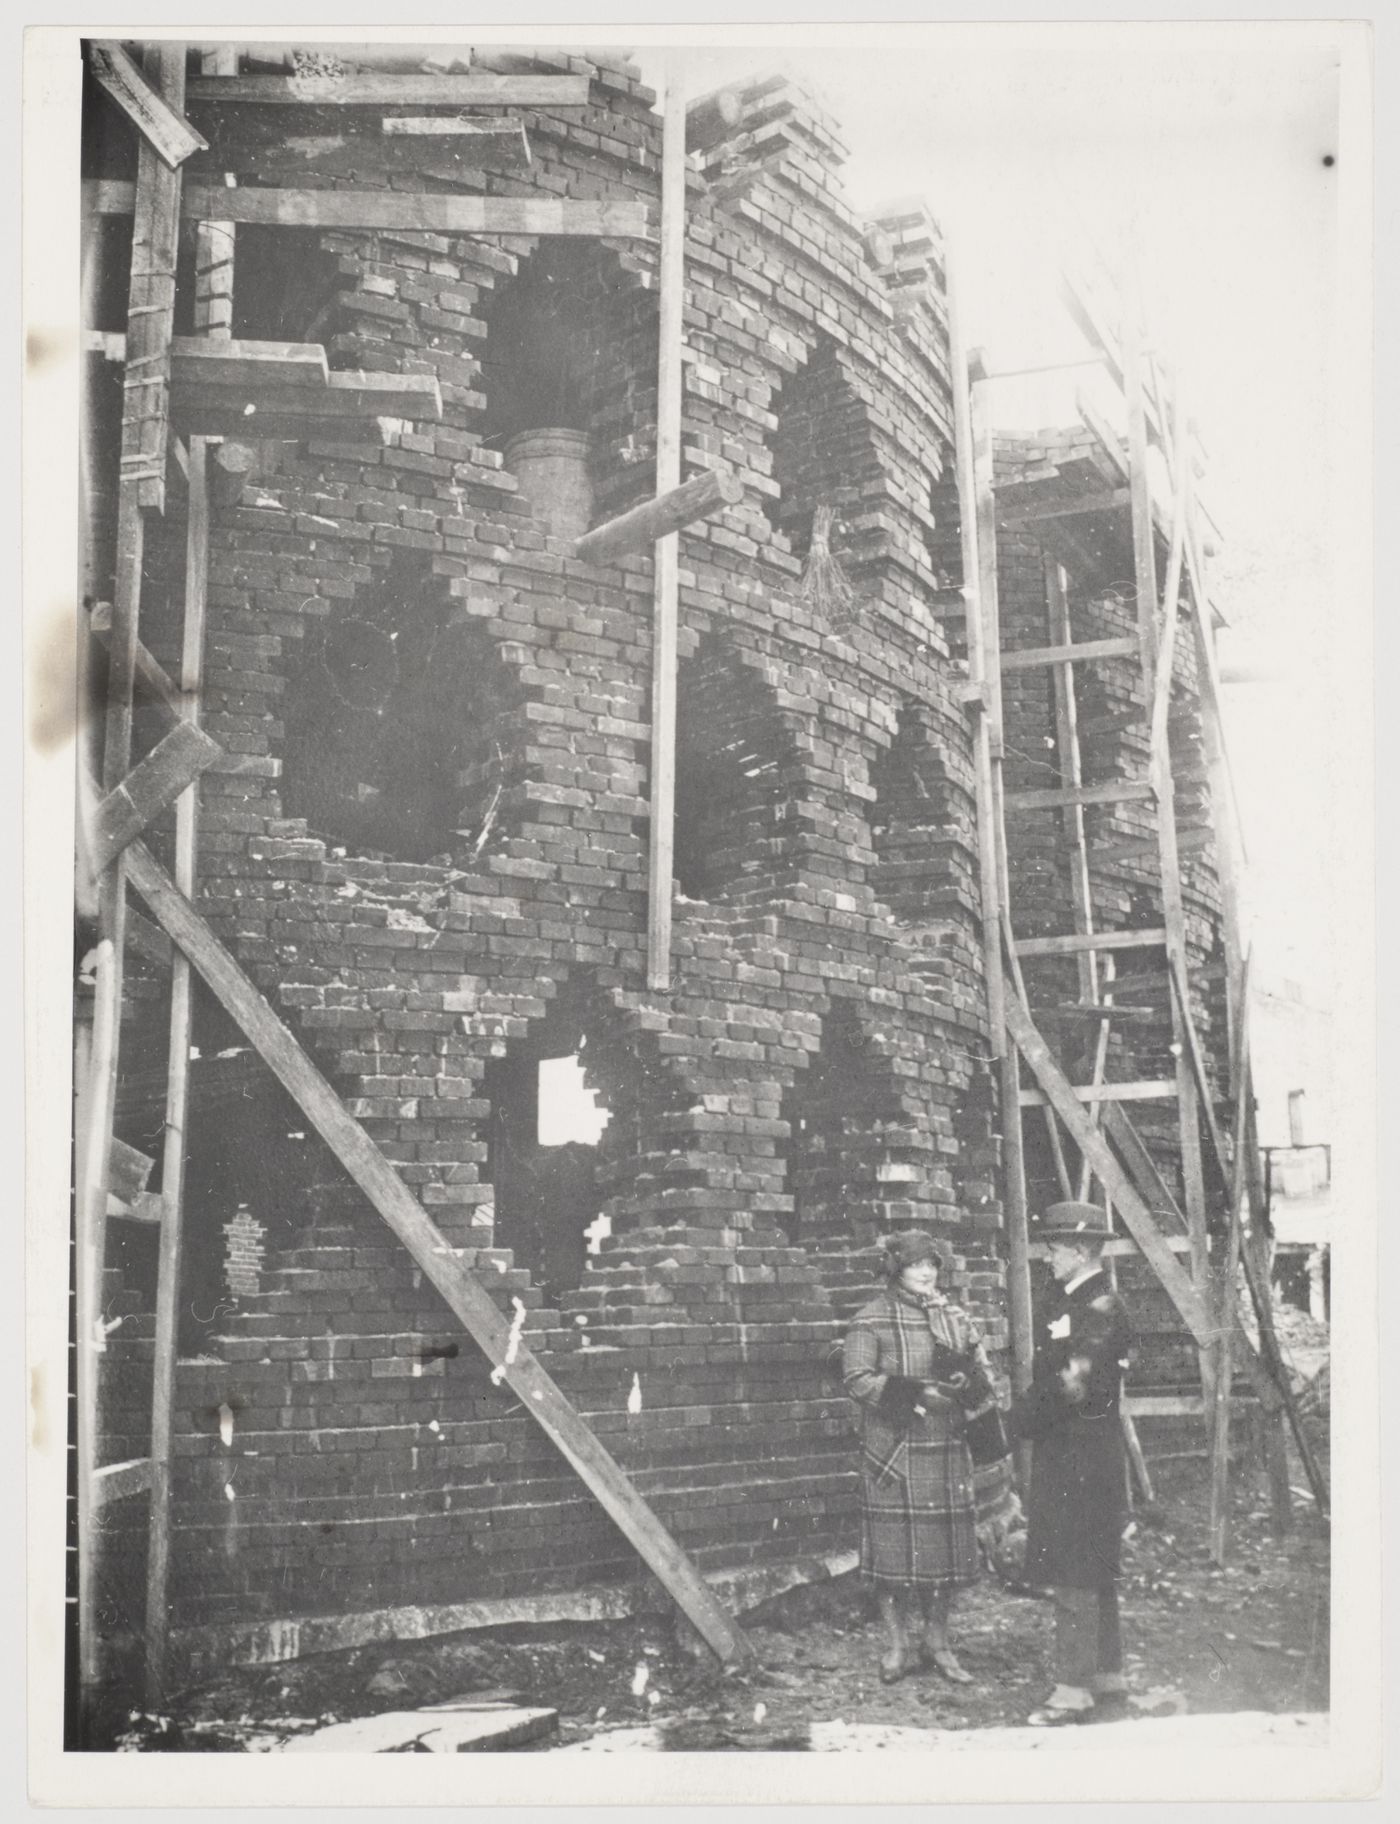 View of the Melnikov residence under construction showing Melnikov and his wife, Moscow